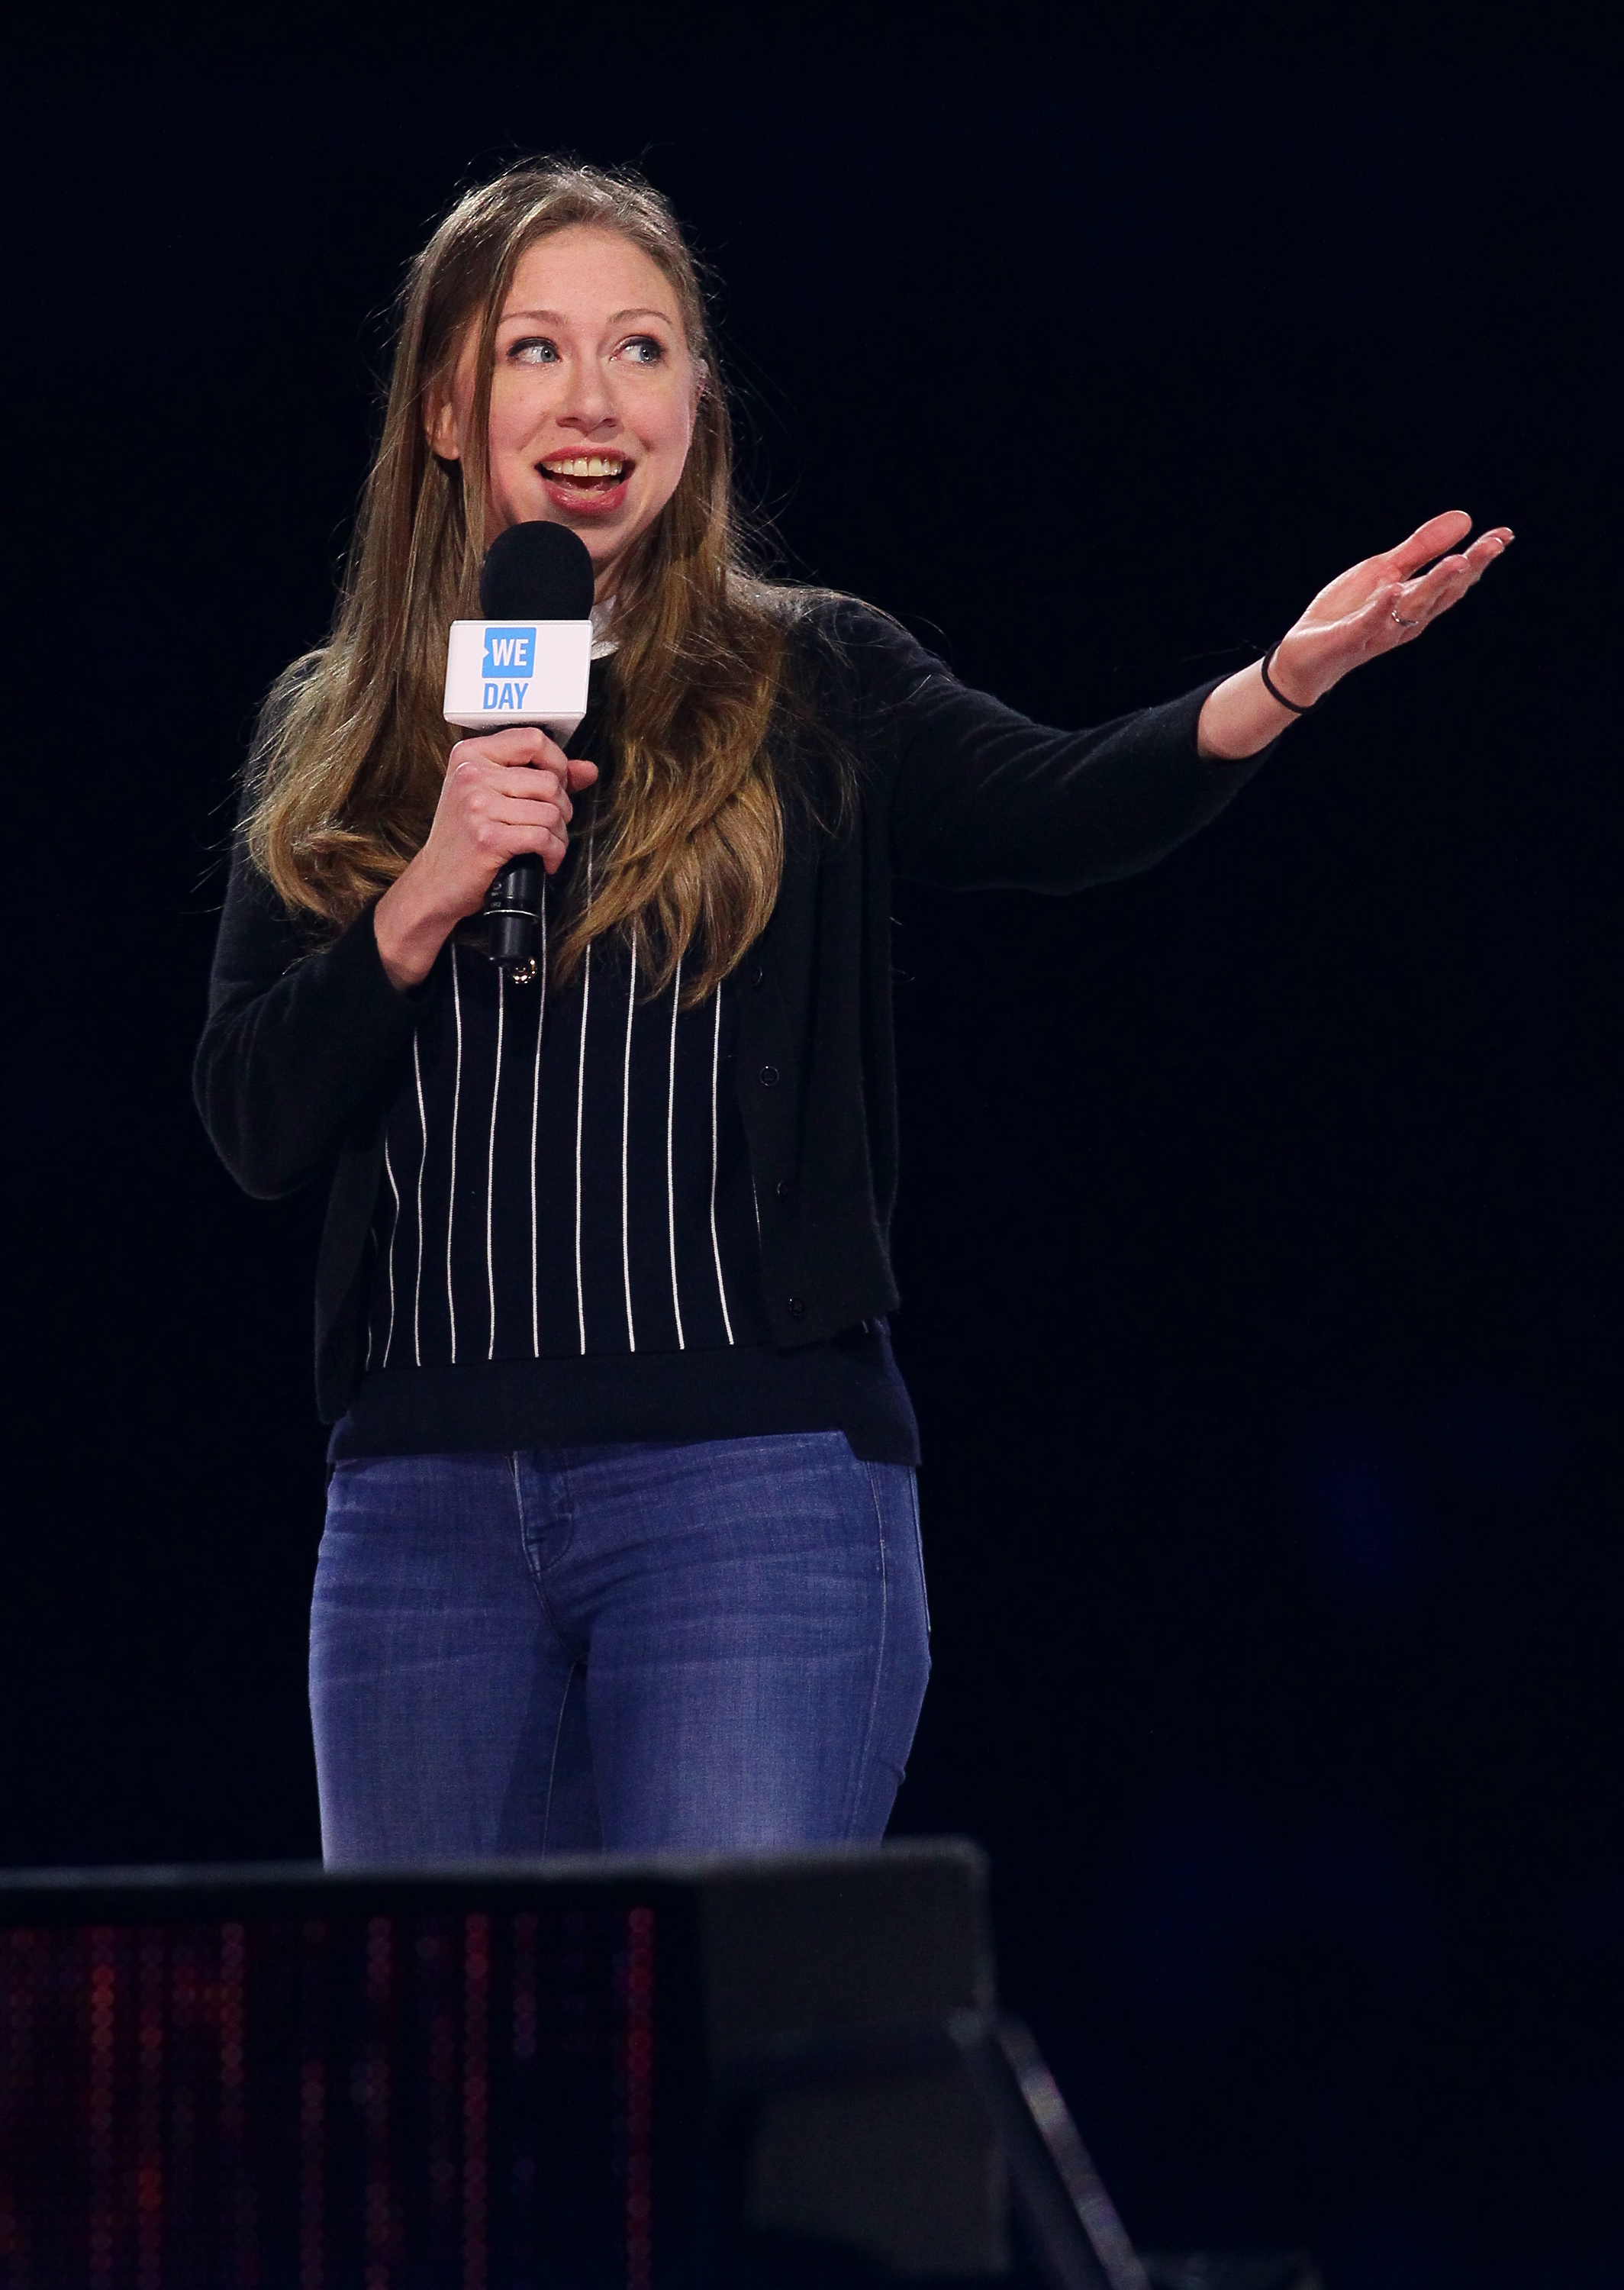 Vice Chair of the Clinton Foundation, Chelsea Clinton, inspires 18,000 students and educators at WE Day Minnesota at the Xcel Energy Center on November 3, 2015. (Adam Bettcher&mdash;2014 Adam Bettcher)